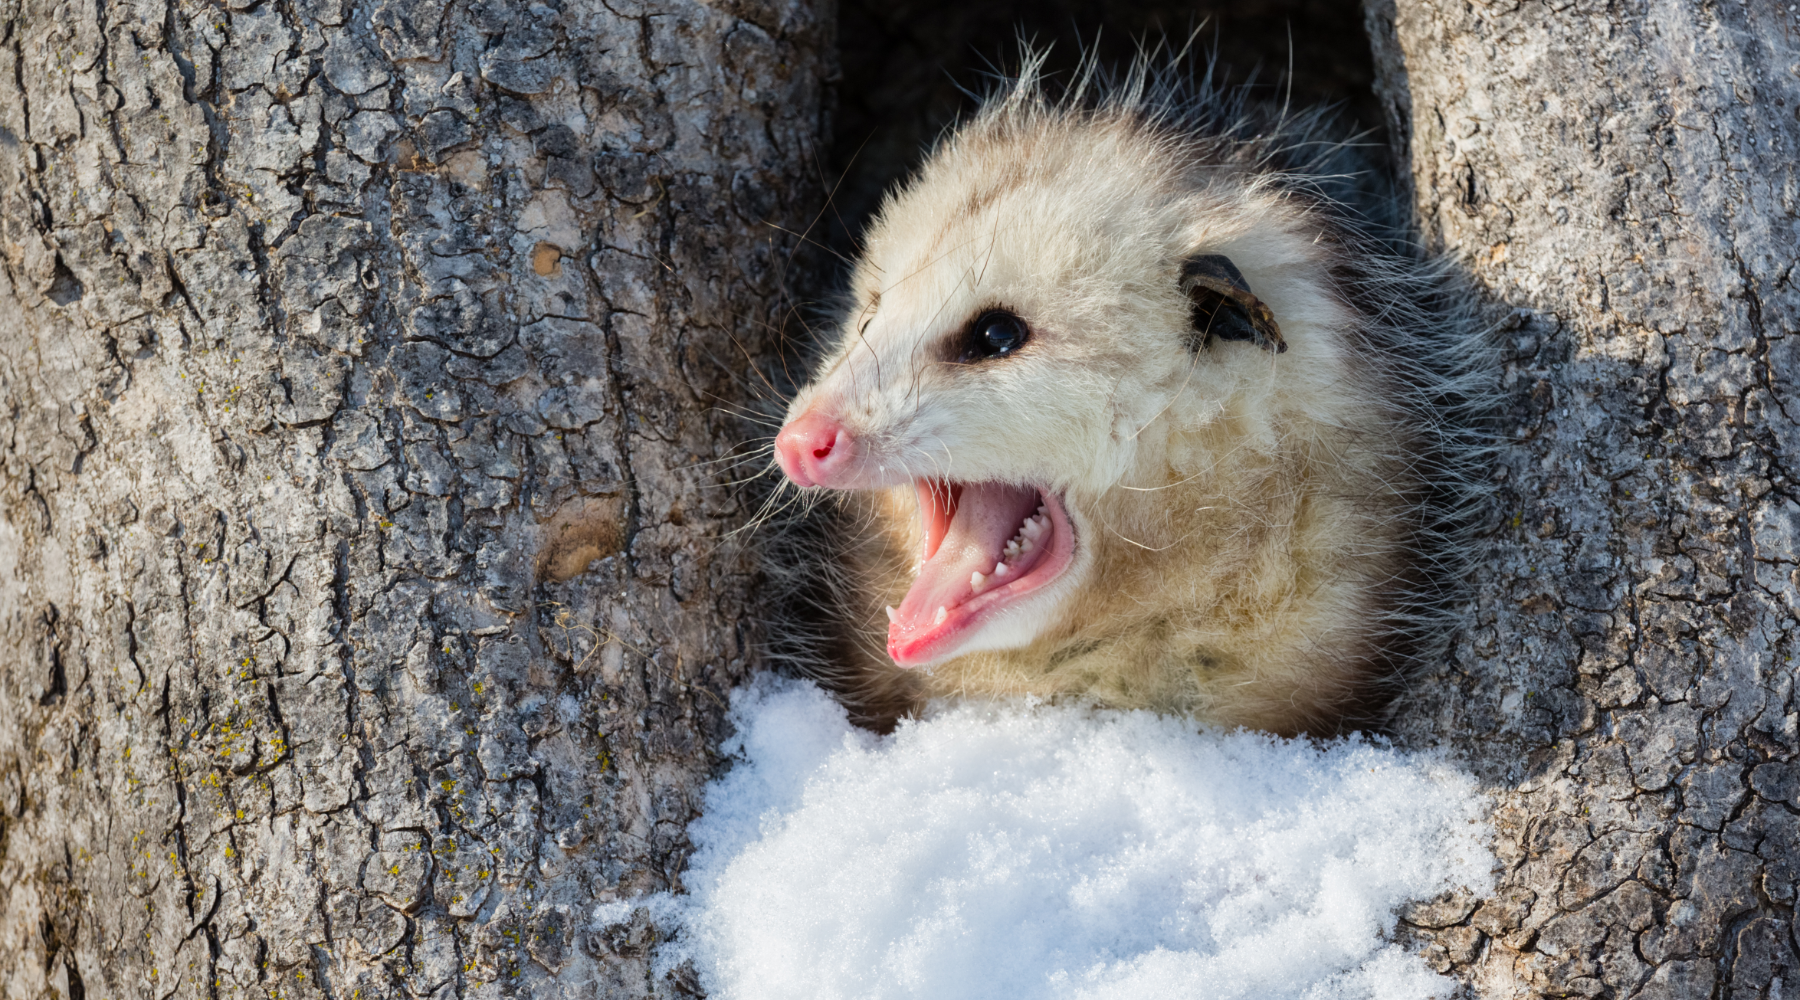 Hissing opossum in a tree - America's only marsupial